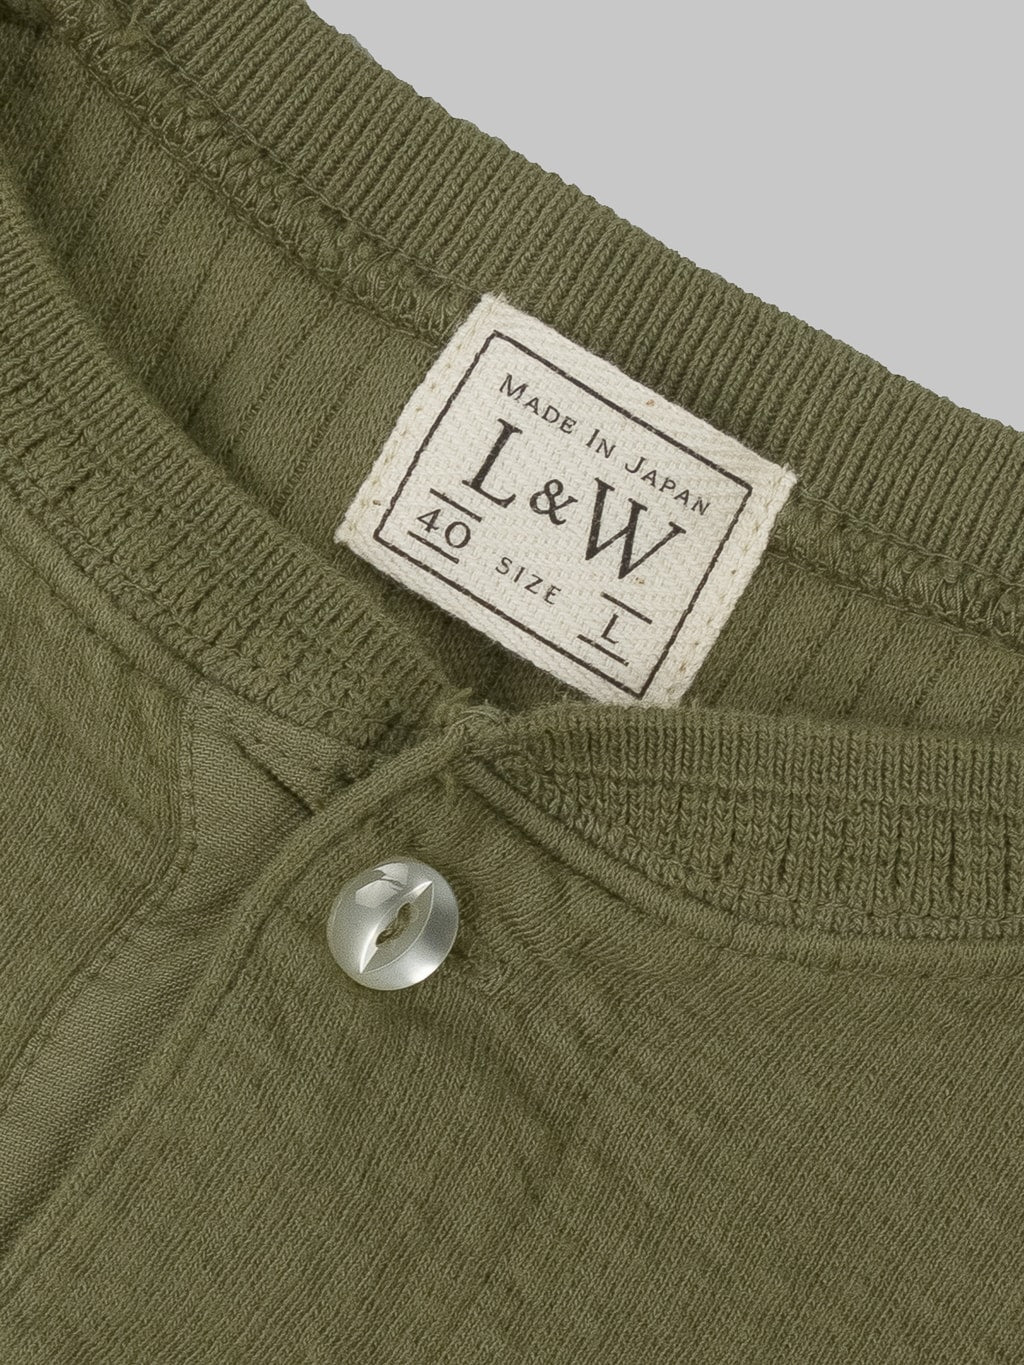 Loop Weft Double Face Jacquard henley Thermal army olive  interior tag